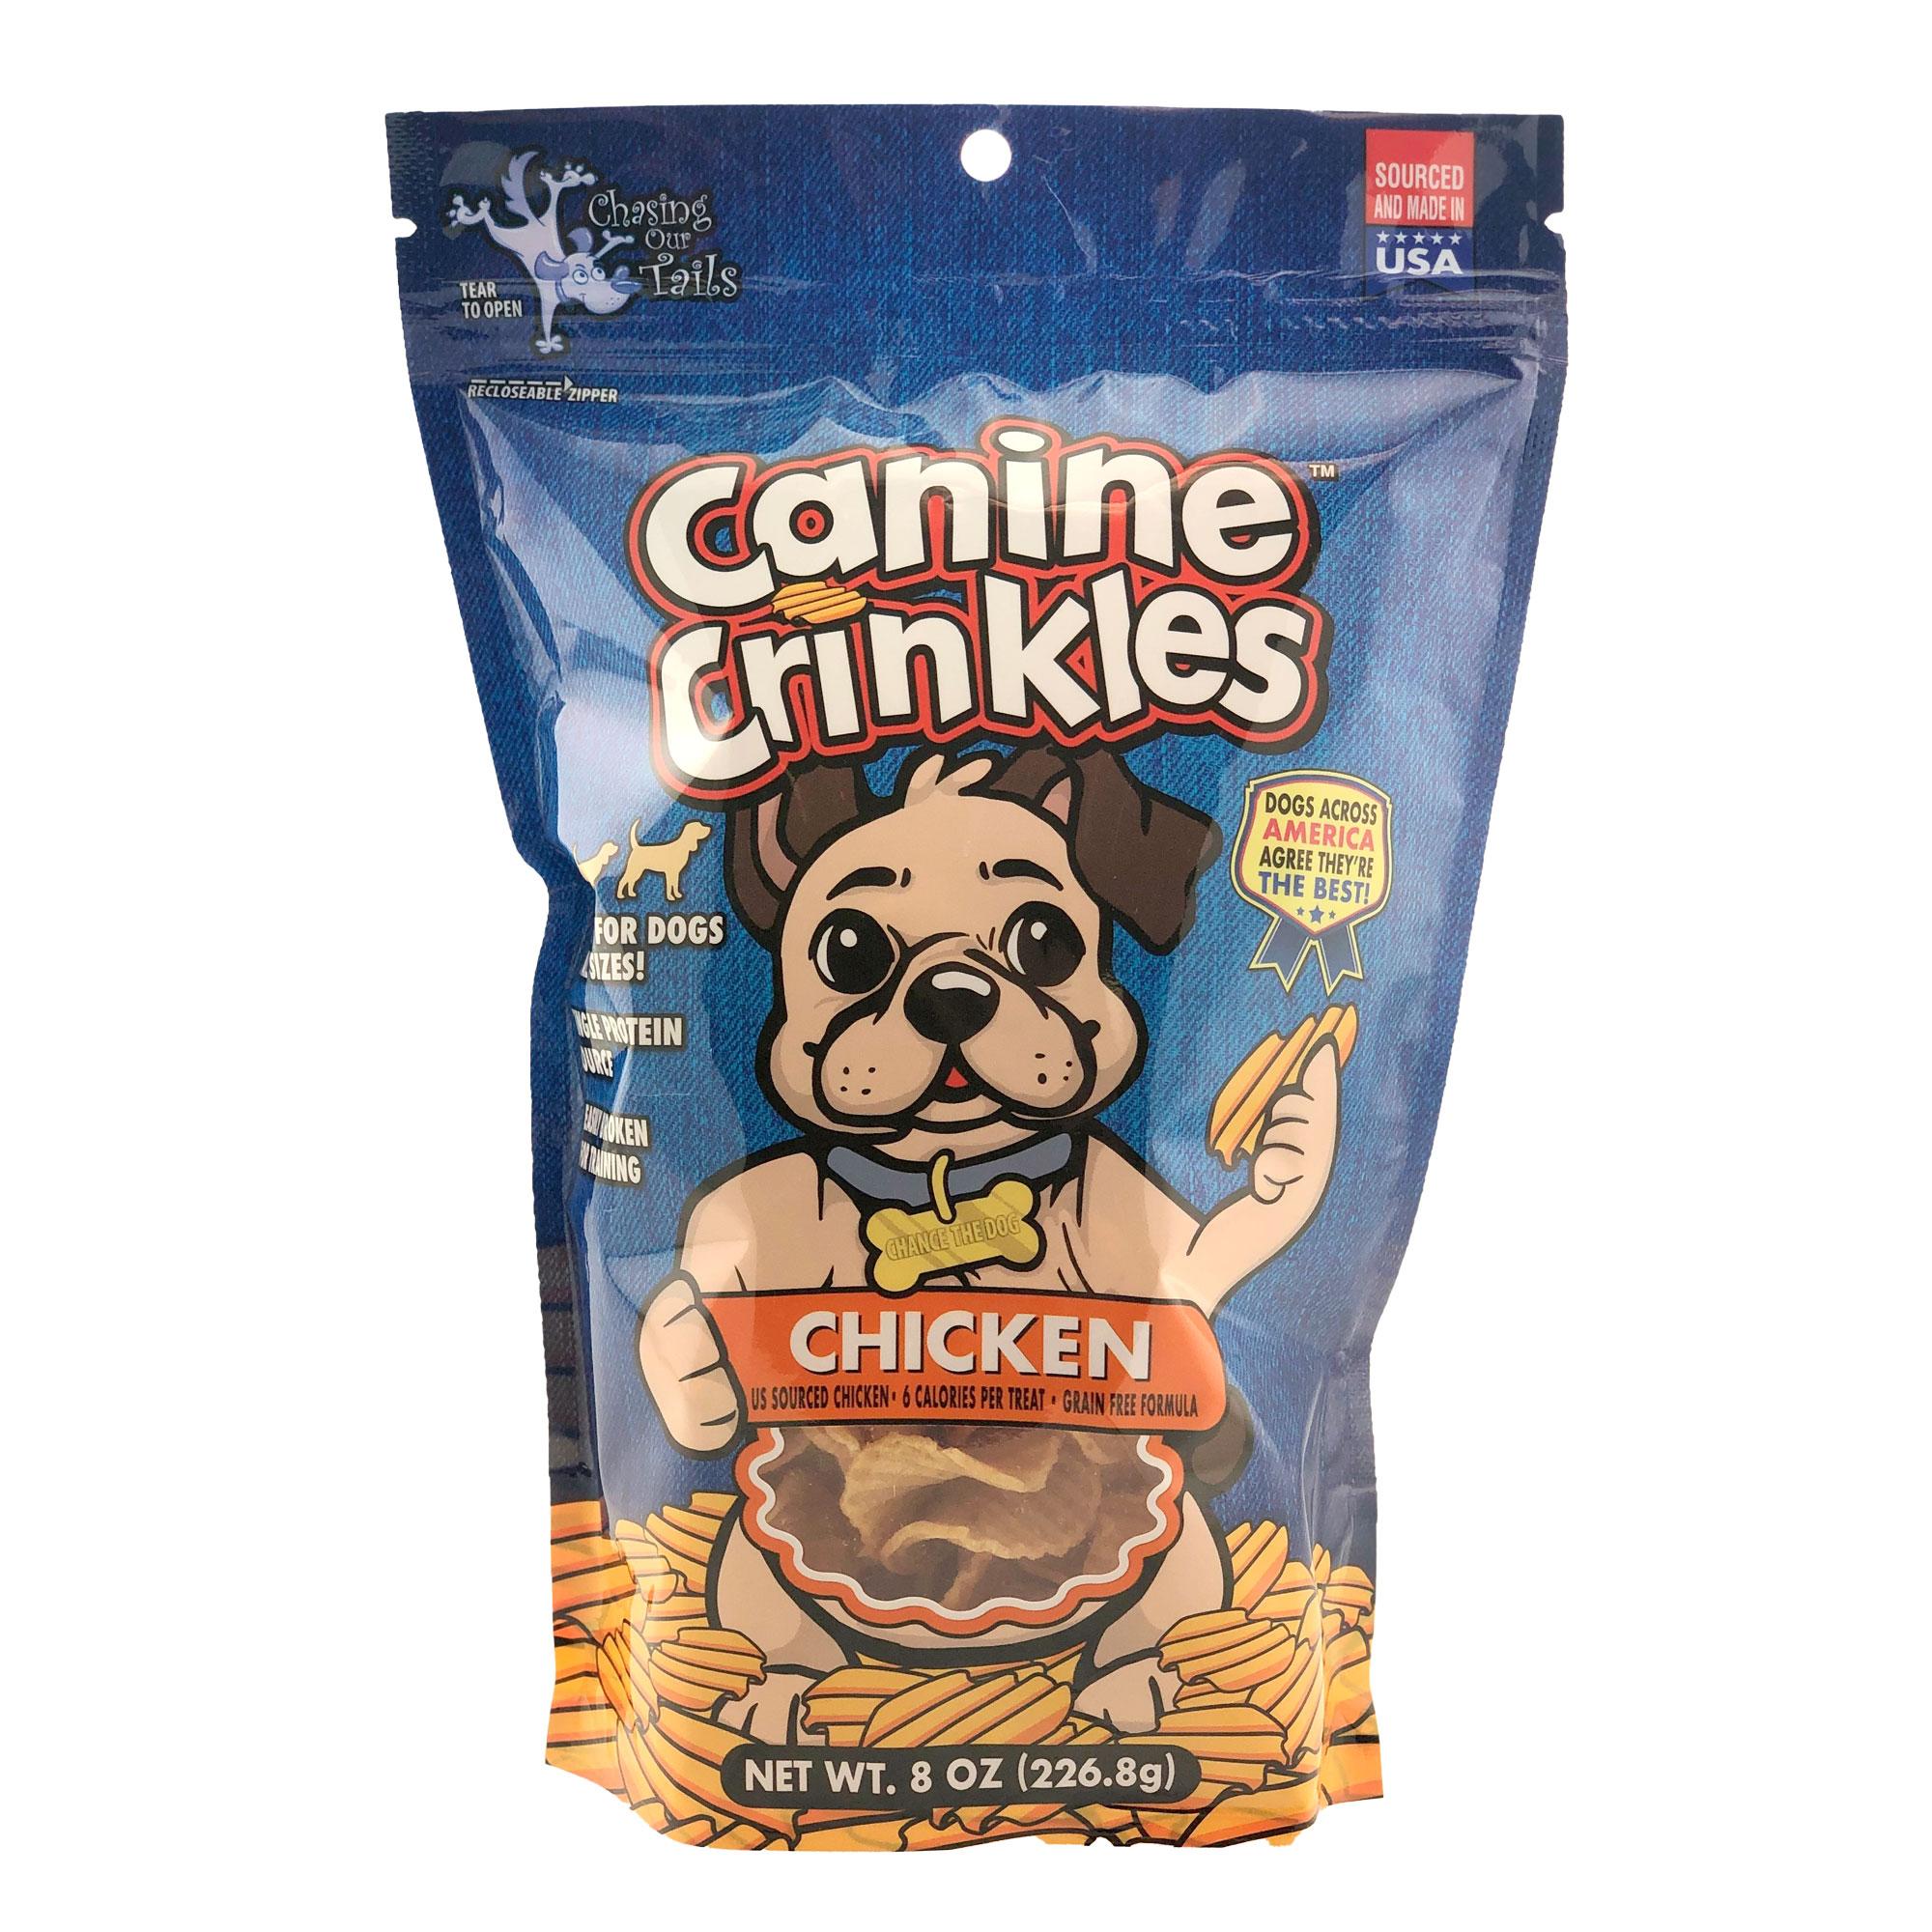 chasing-our-tails-canine-crinkles-dog-treats-chicken